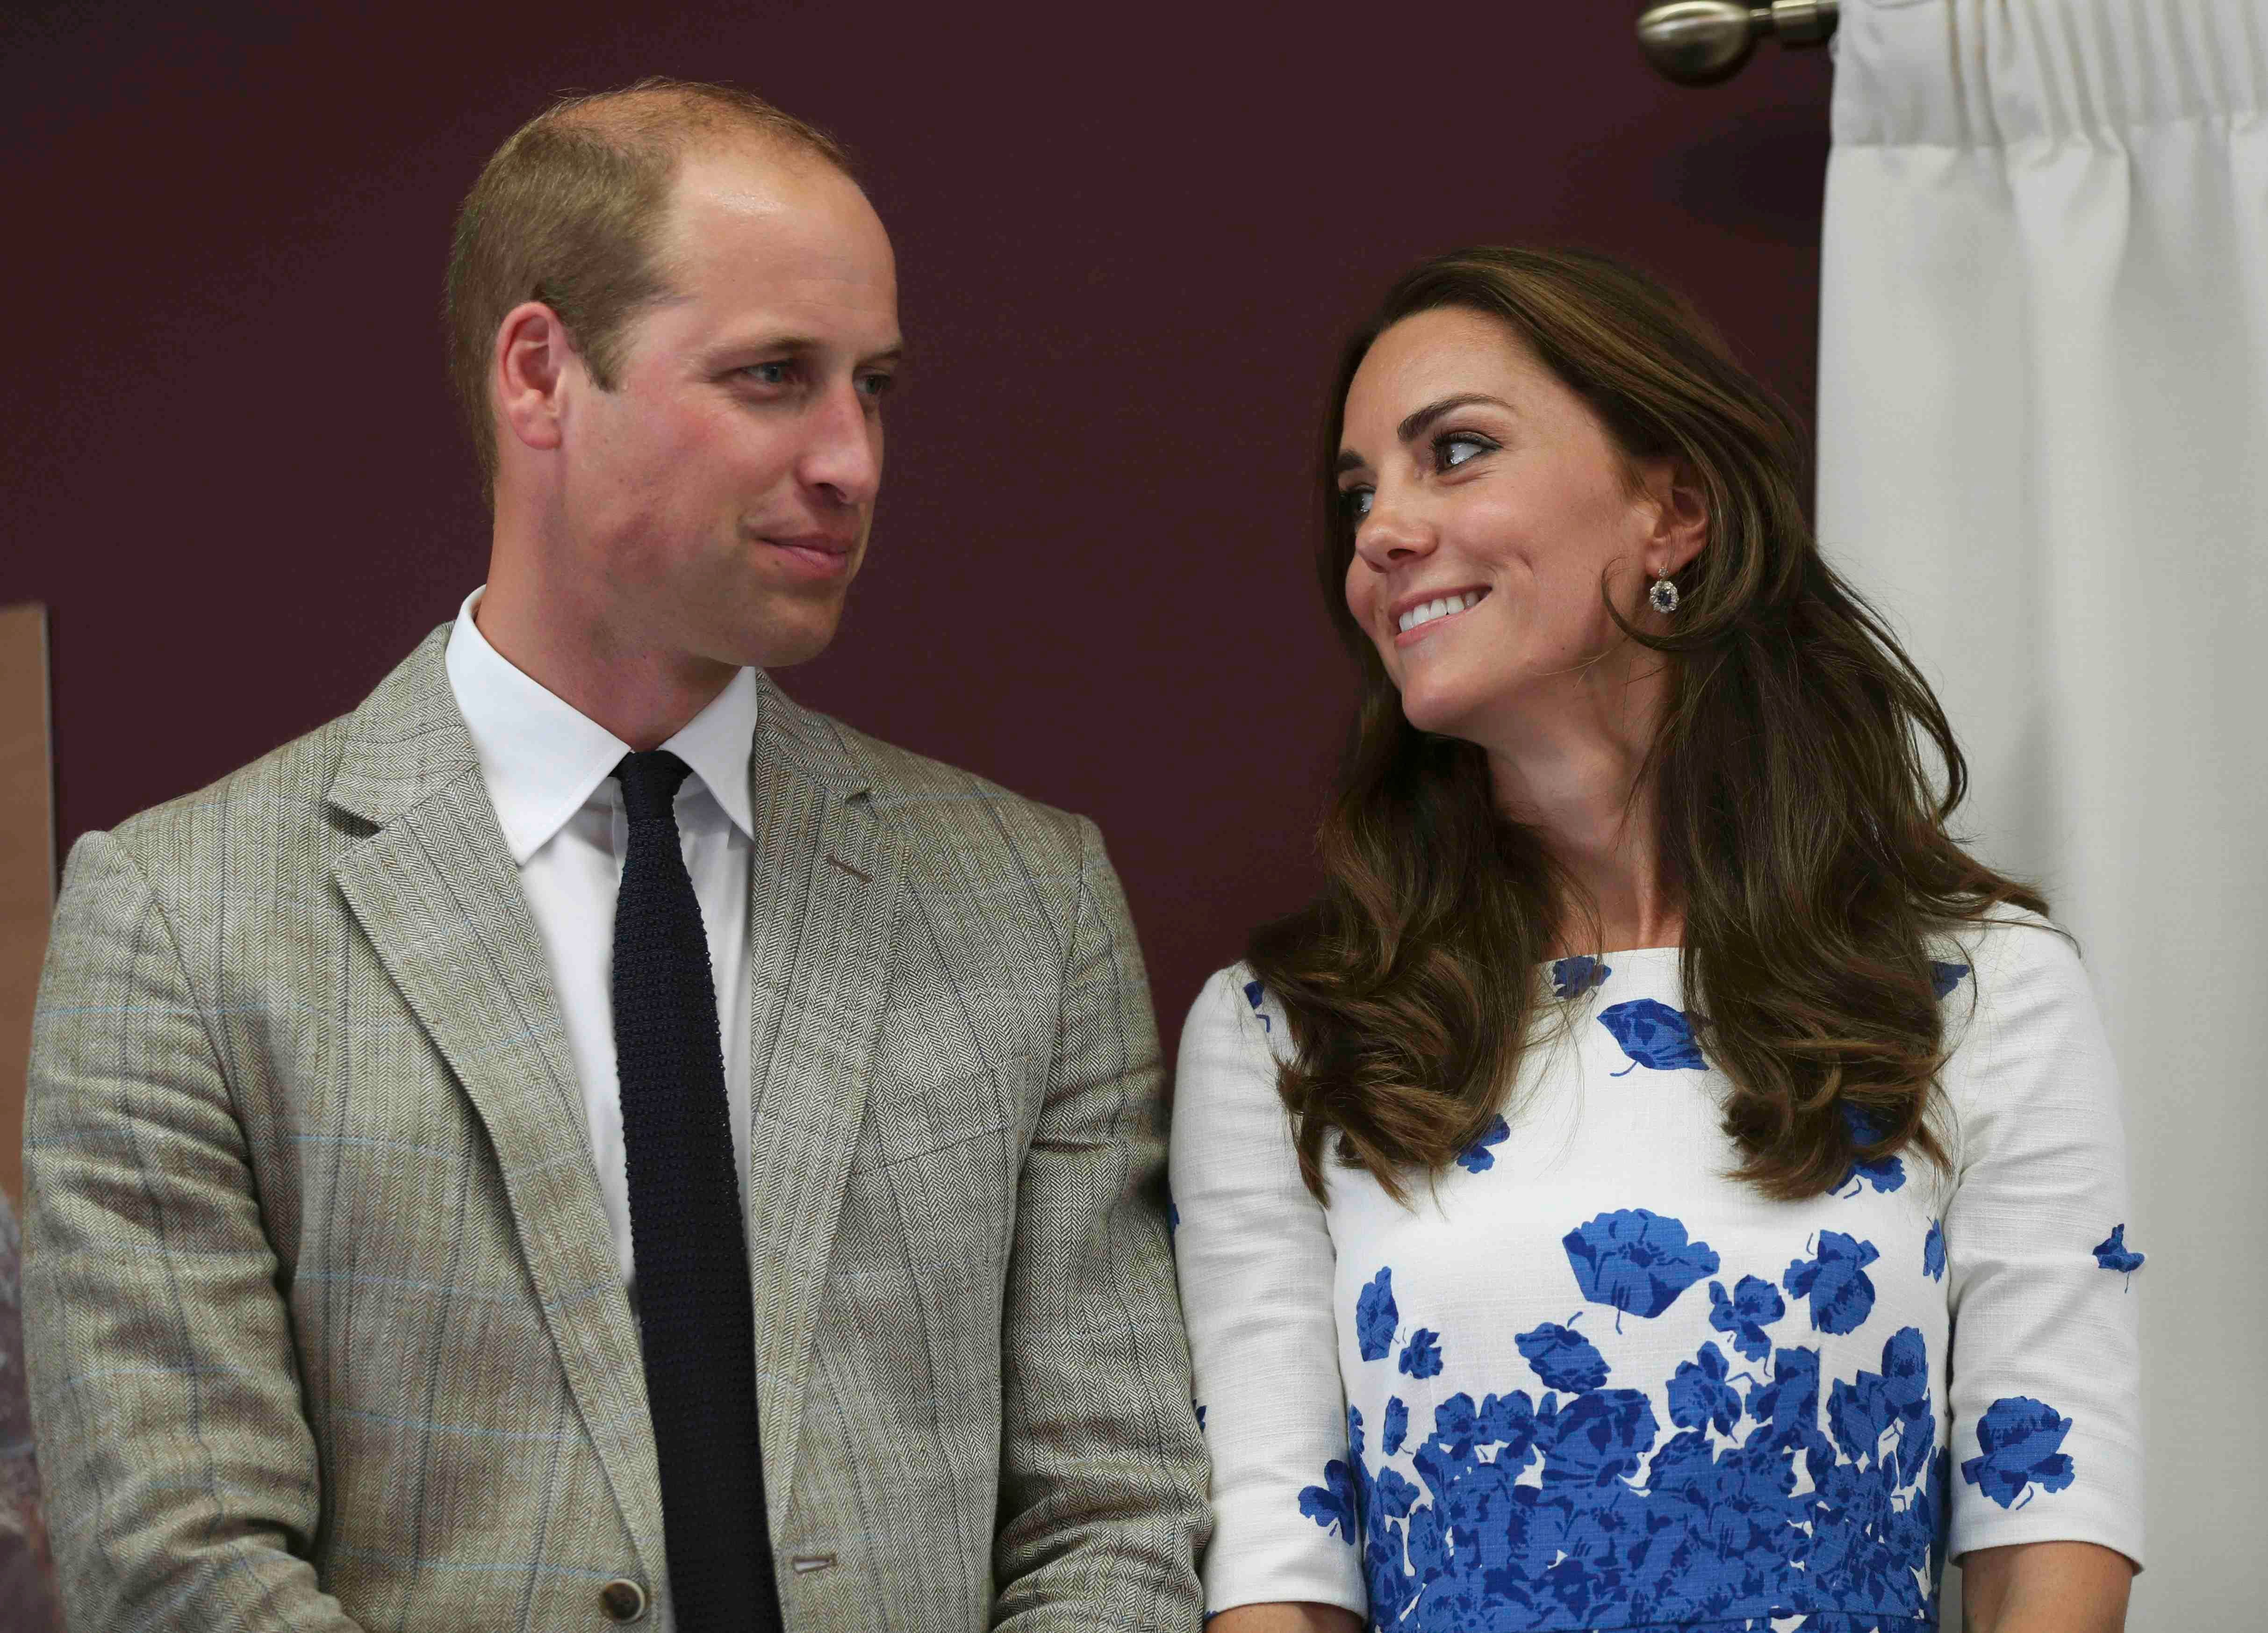 Prince William and Kate Middleton during their visit to Keech Hospice Care on August 24, 2016 | Photo: Getty Images 